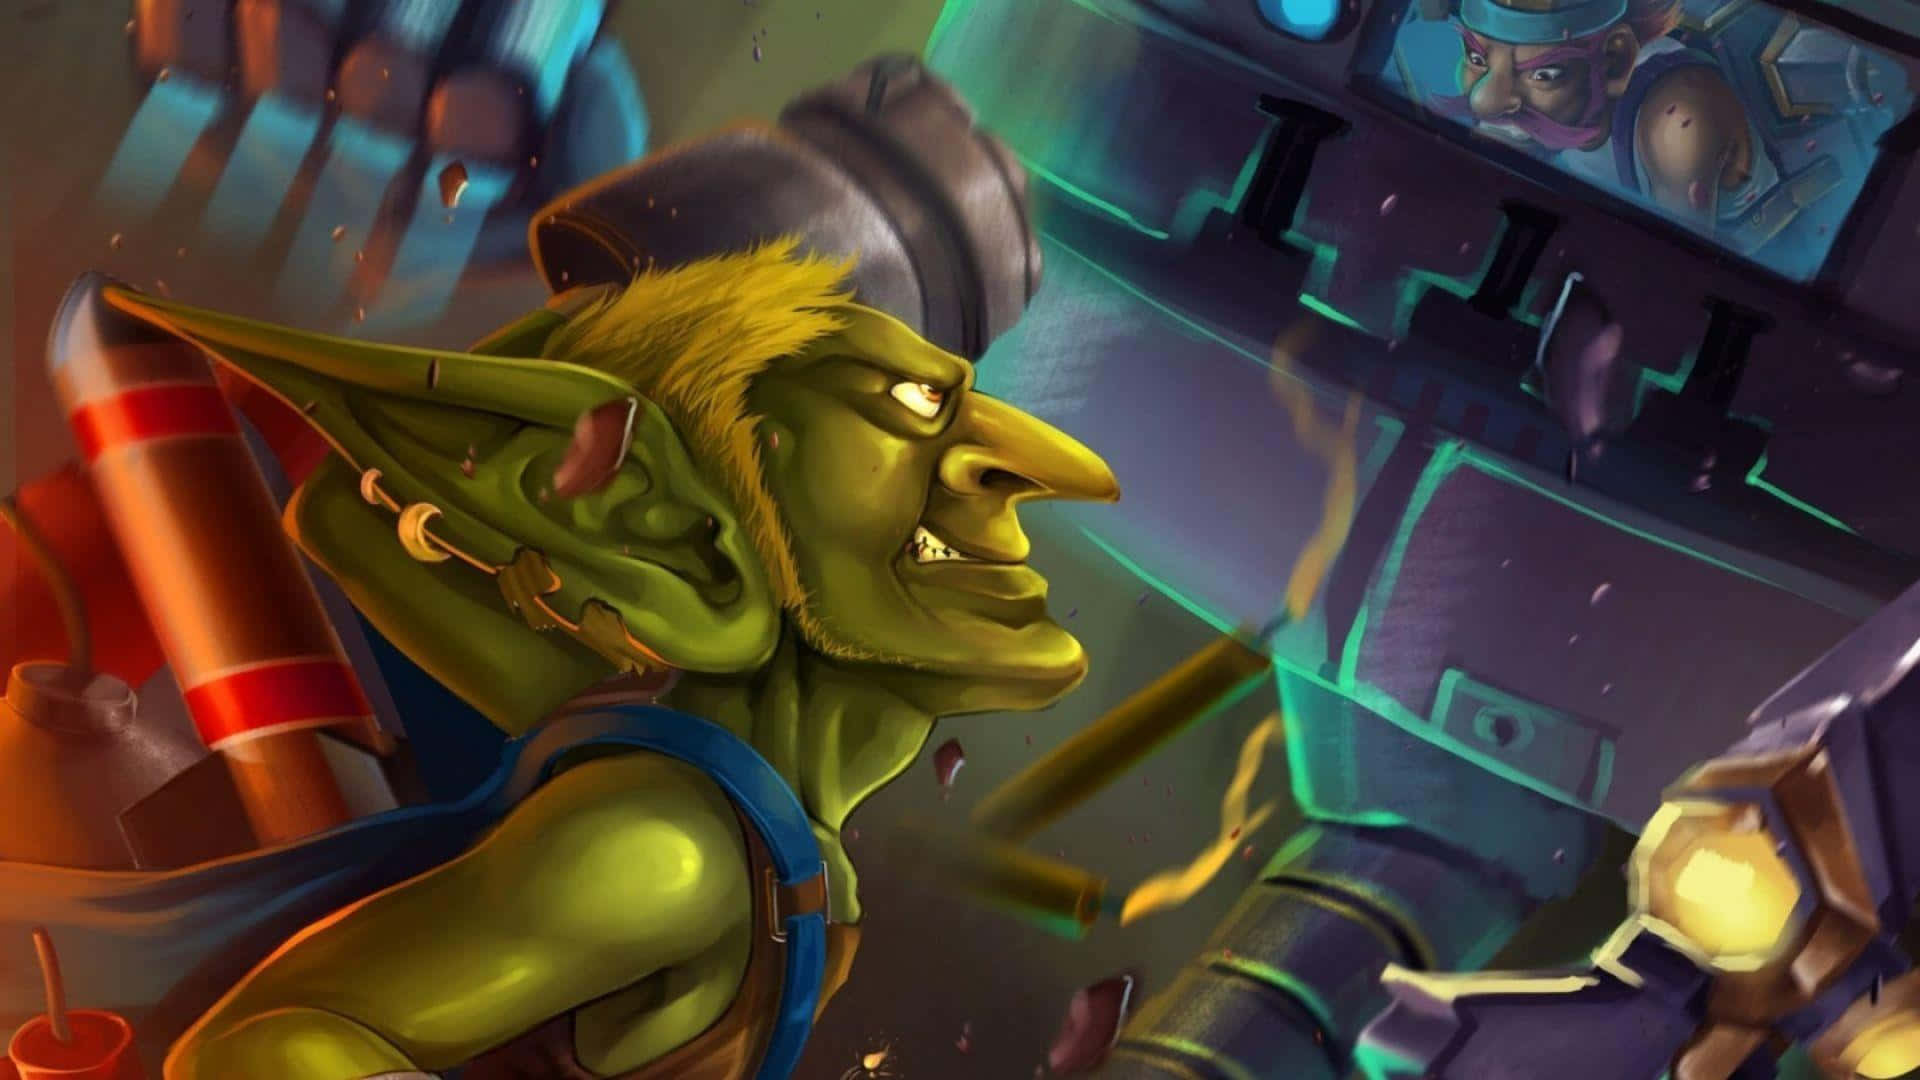 Immerse yourself in a world of epic card battles with Hearthstone!